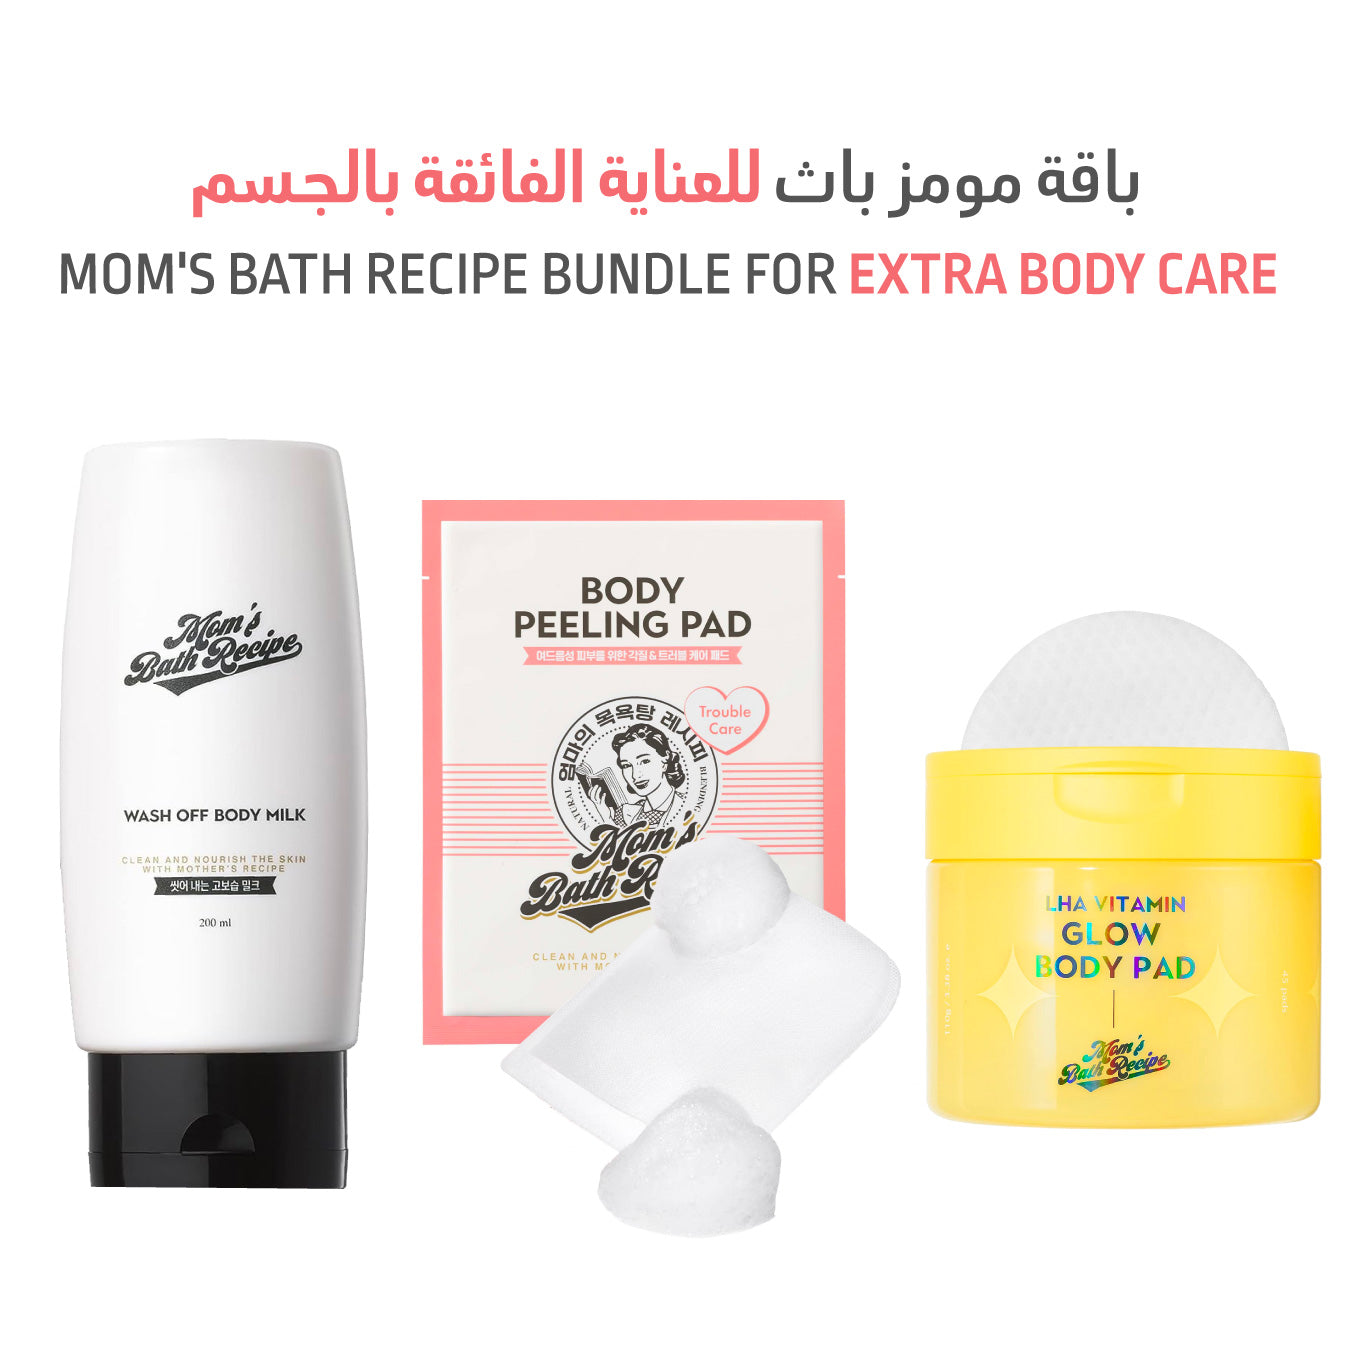 Mom's Bath Ul﻿timate Body Care Package